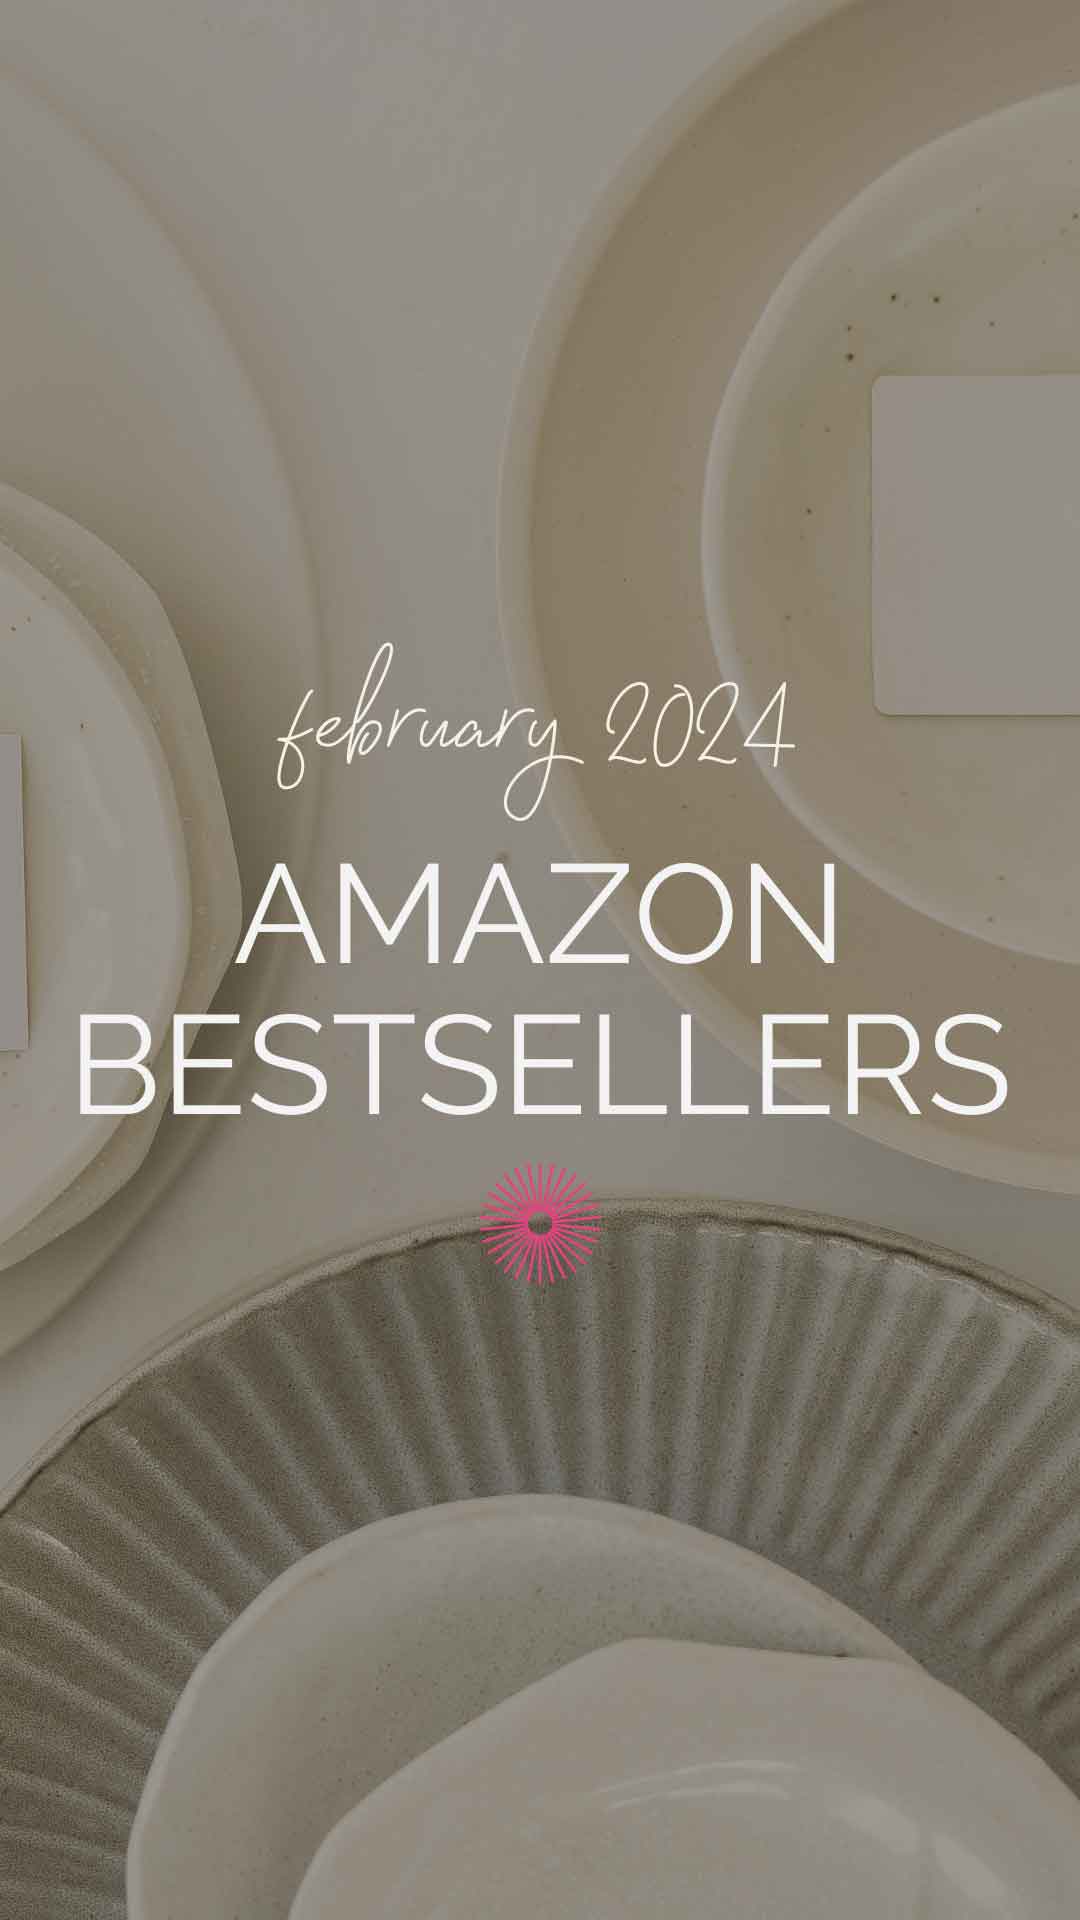 Background of beige plates with text overlay "February 2024 Amazon Bestsellers".